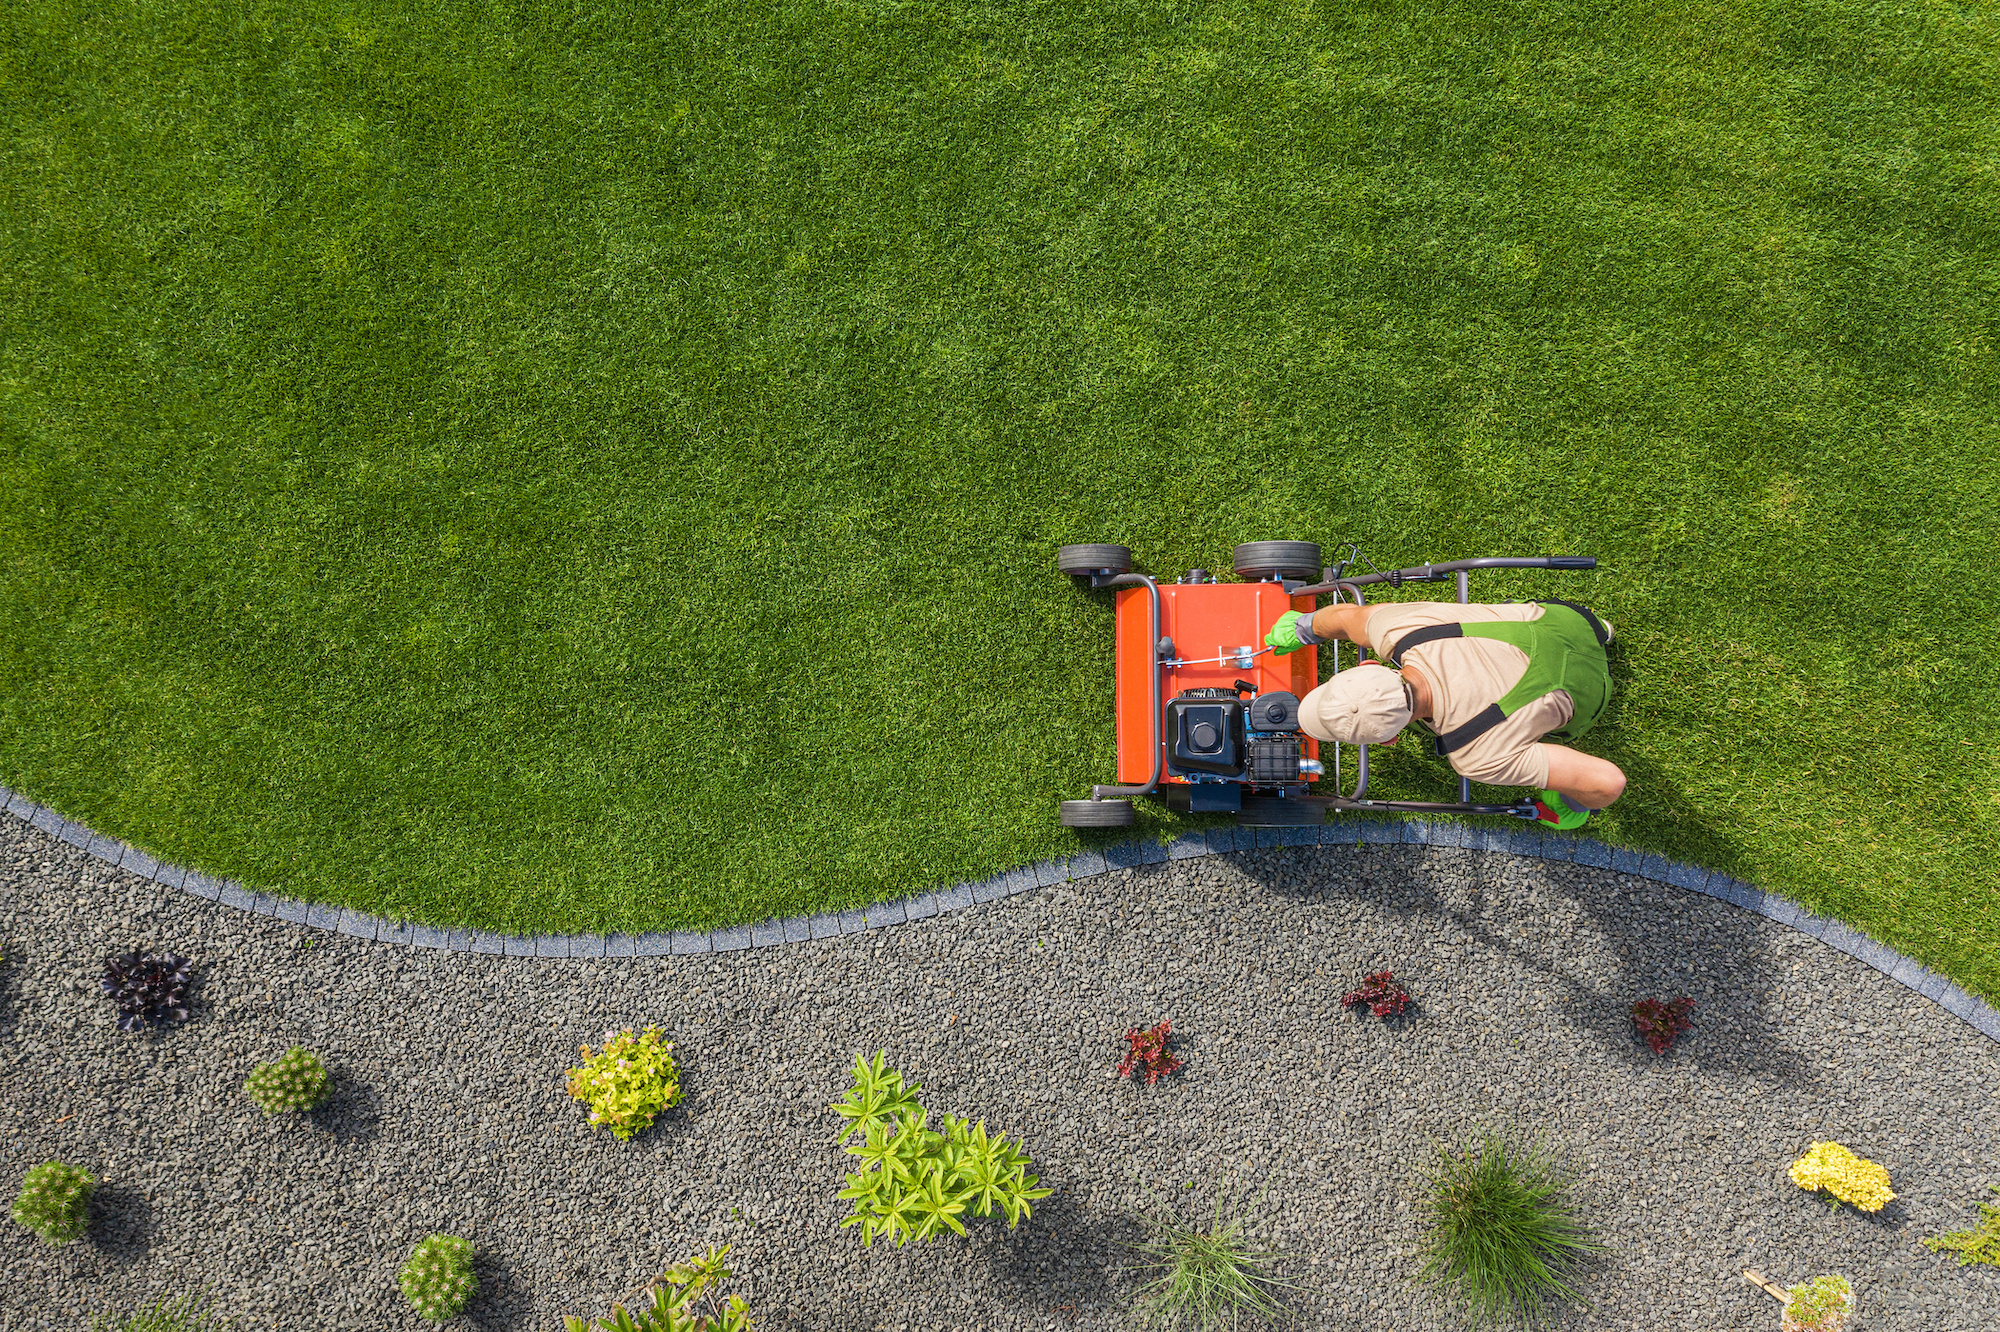 Pristine Turf Management: The Ultimate Lawn Care Experience for Your Home or Business